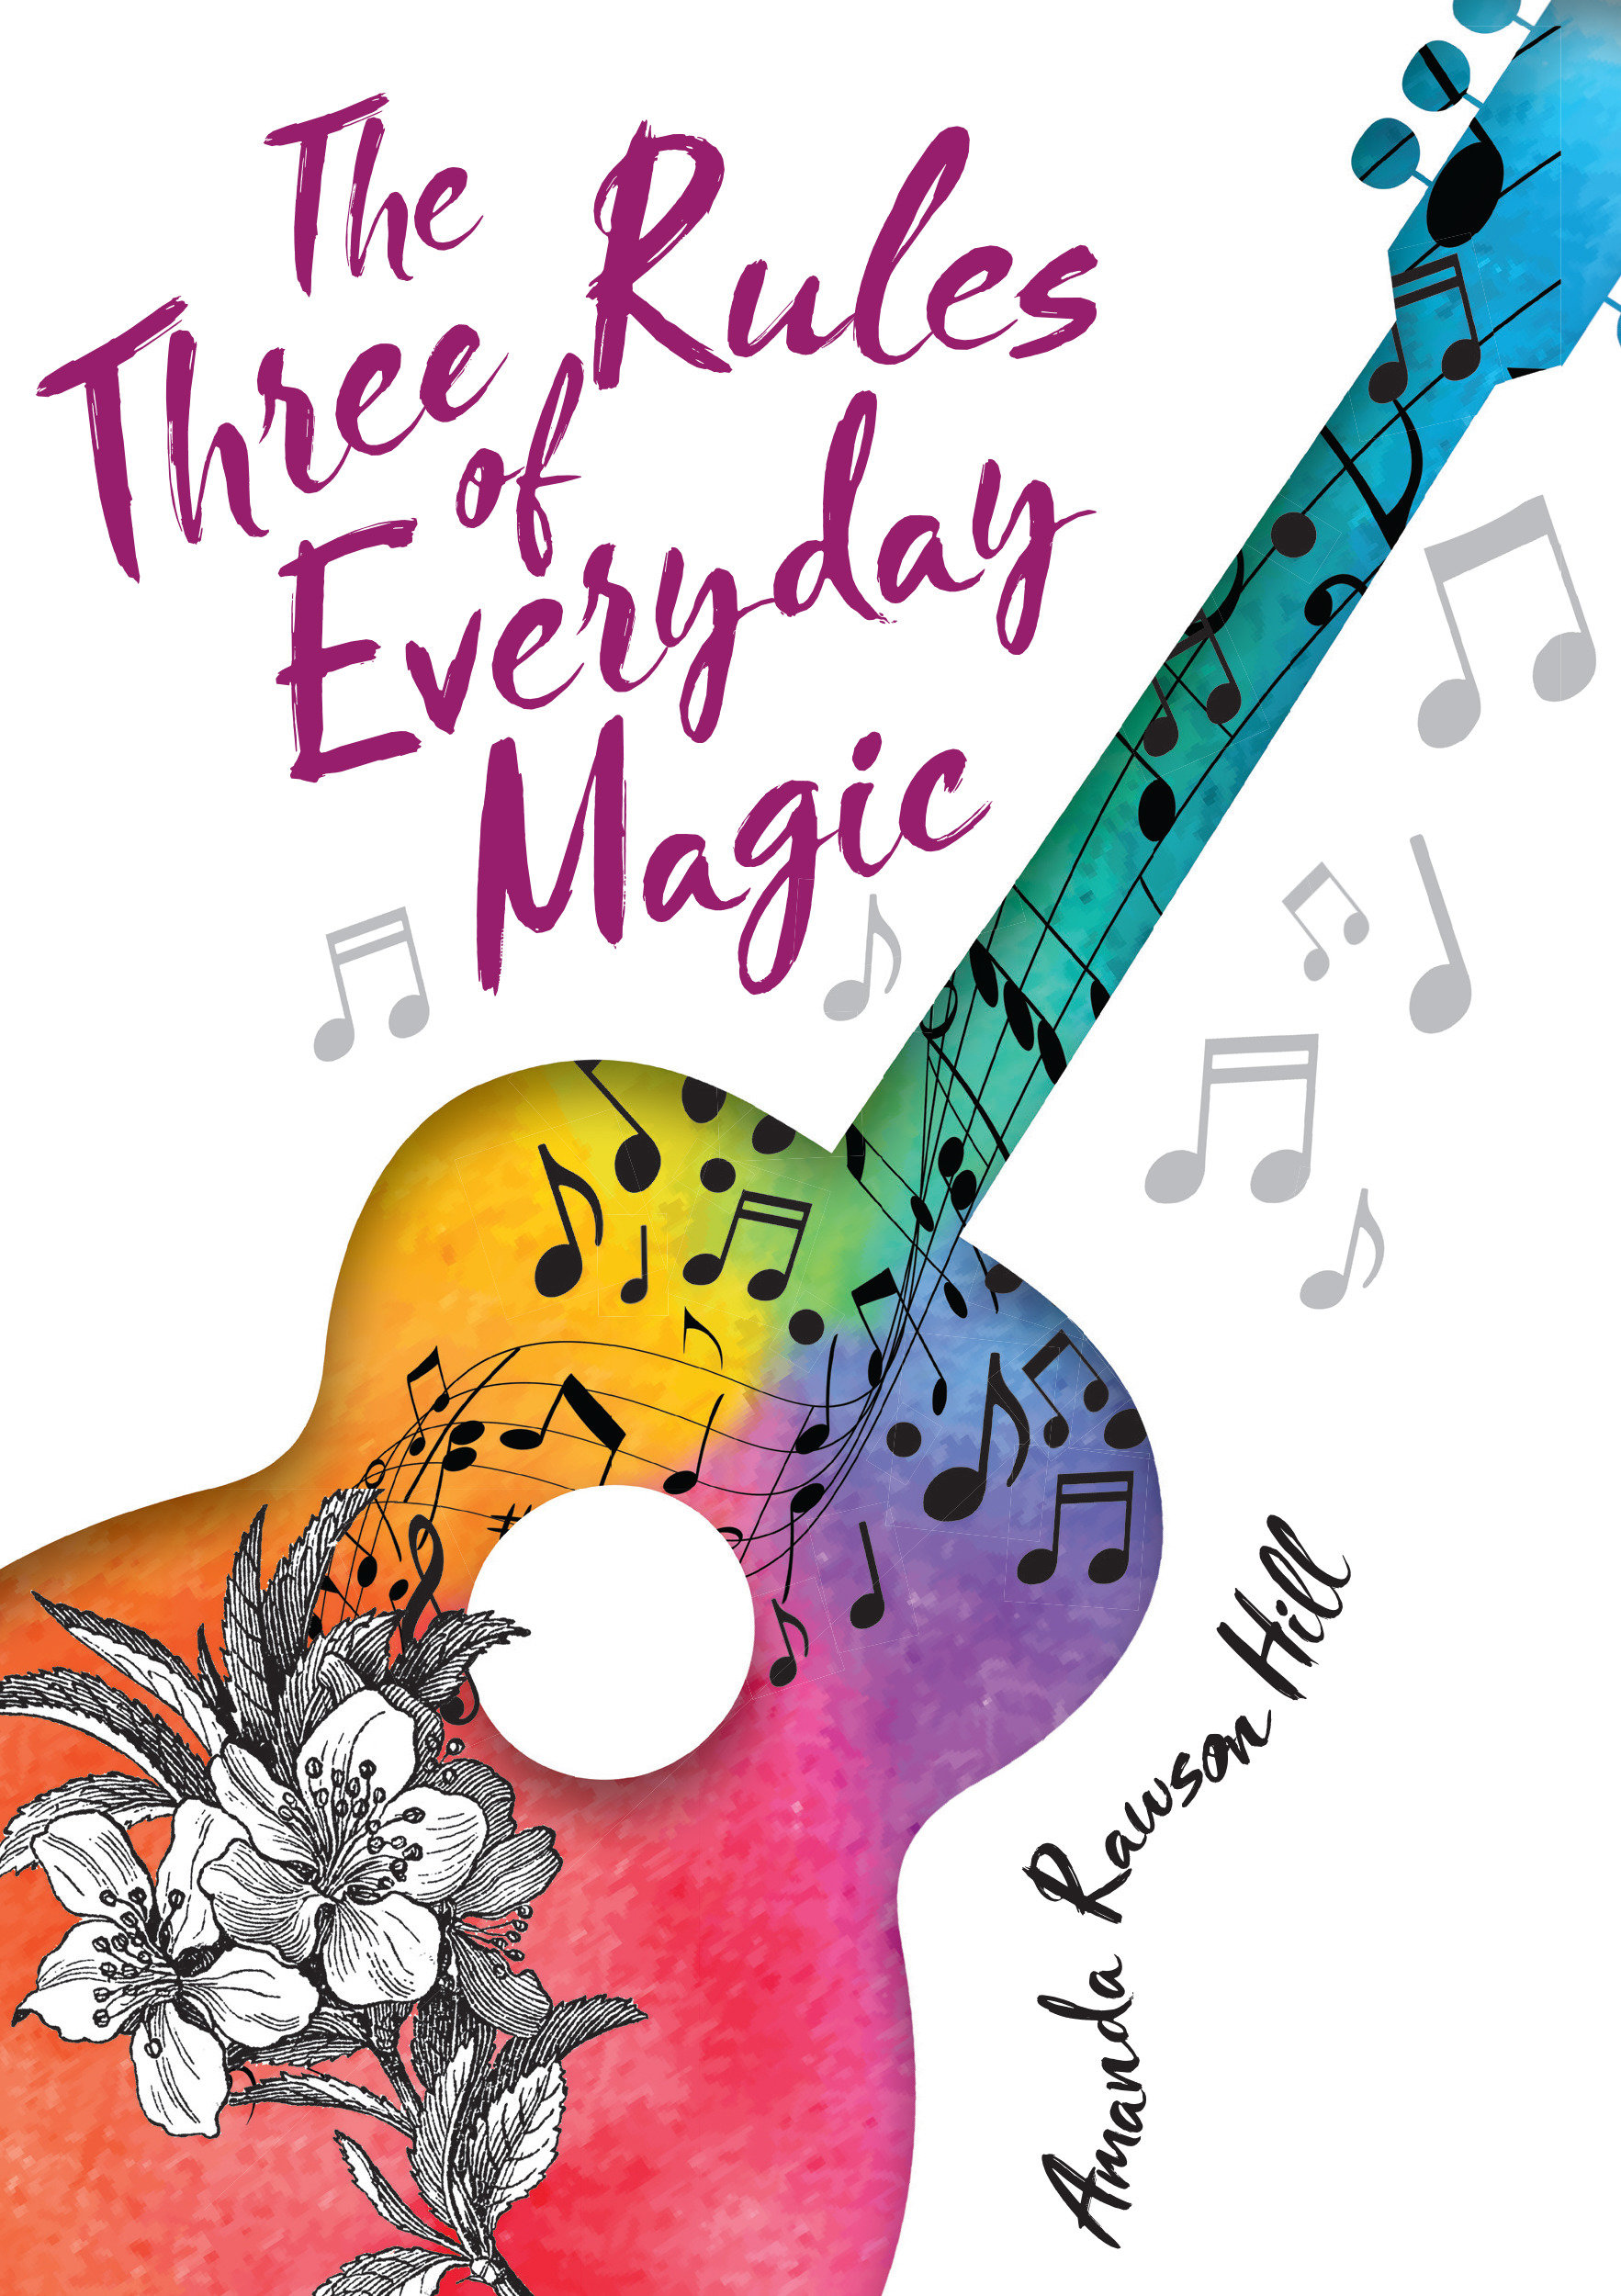 The Three Rules Of Everyday Magic (Hardcover Book)